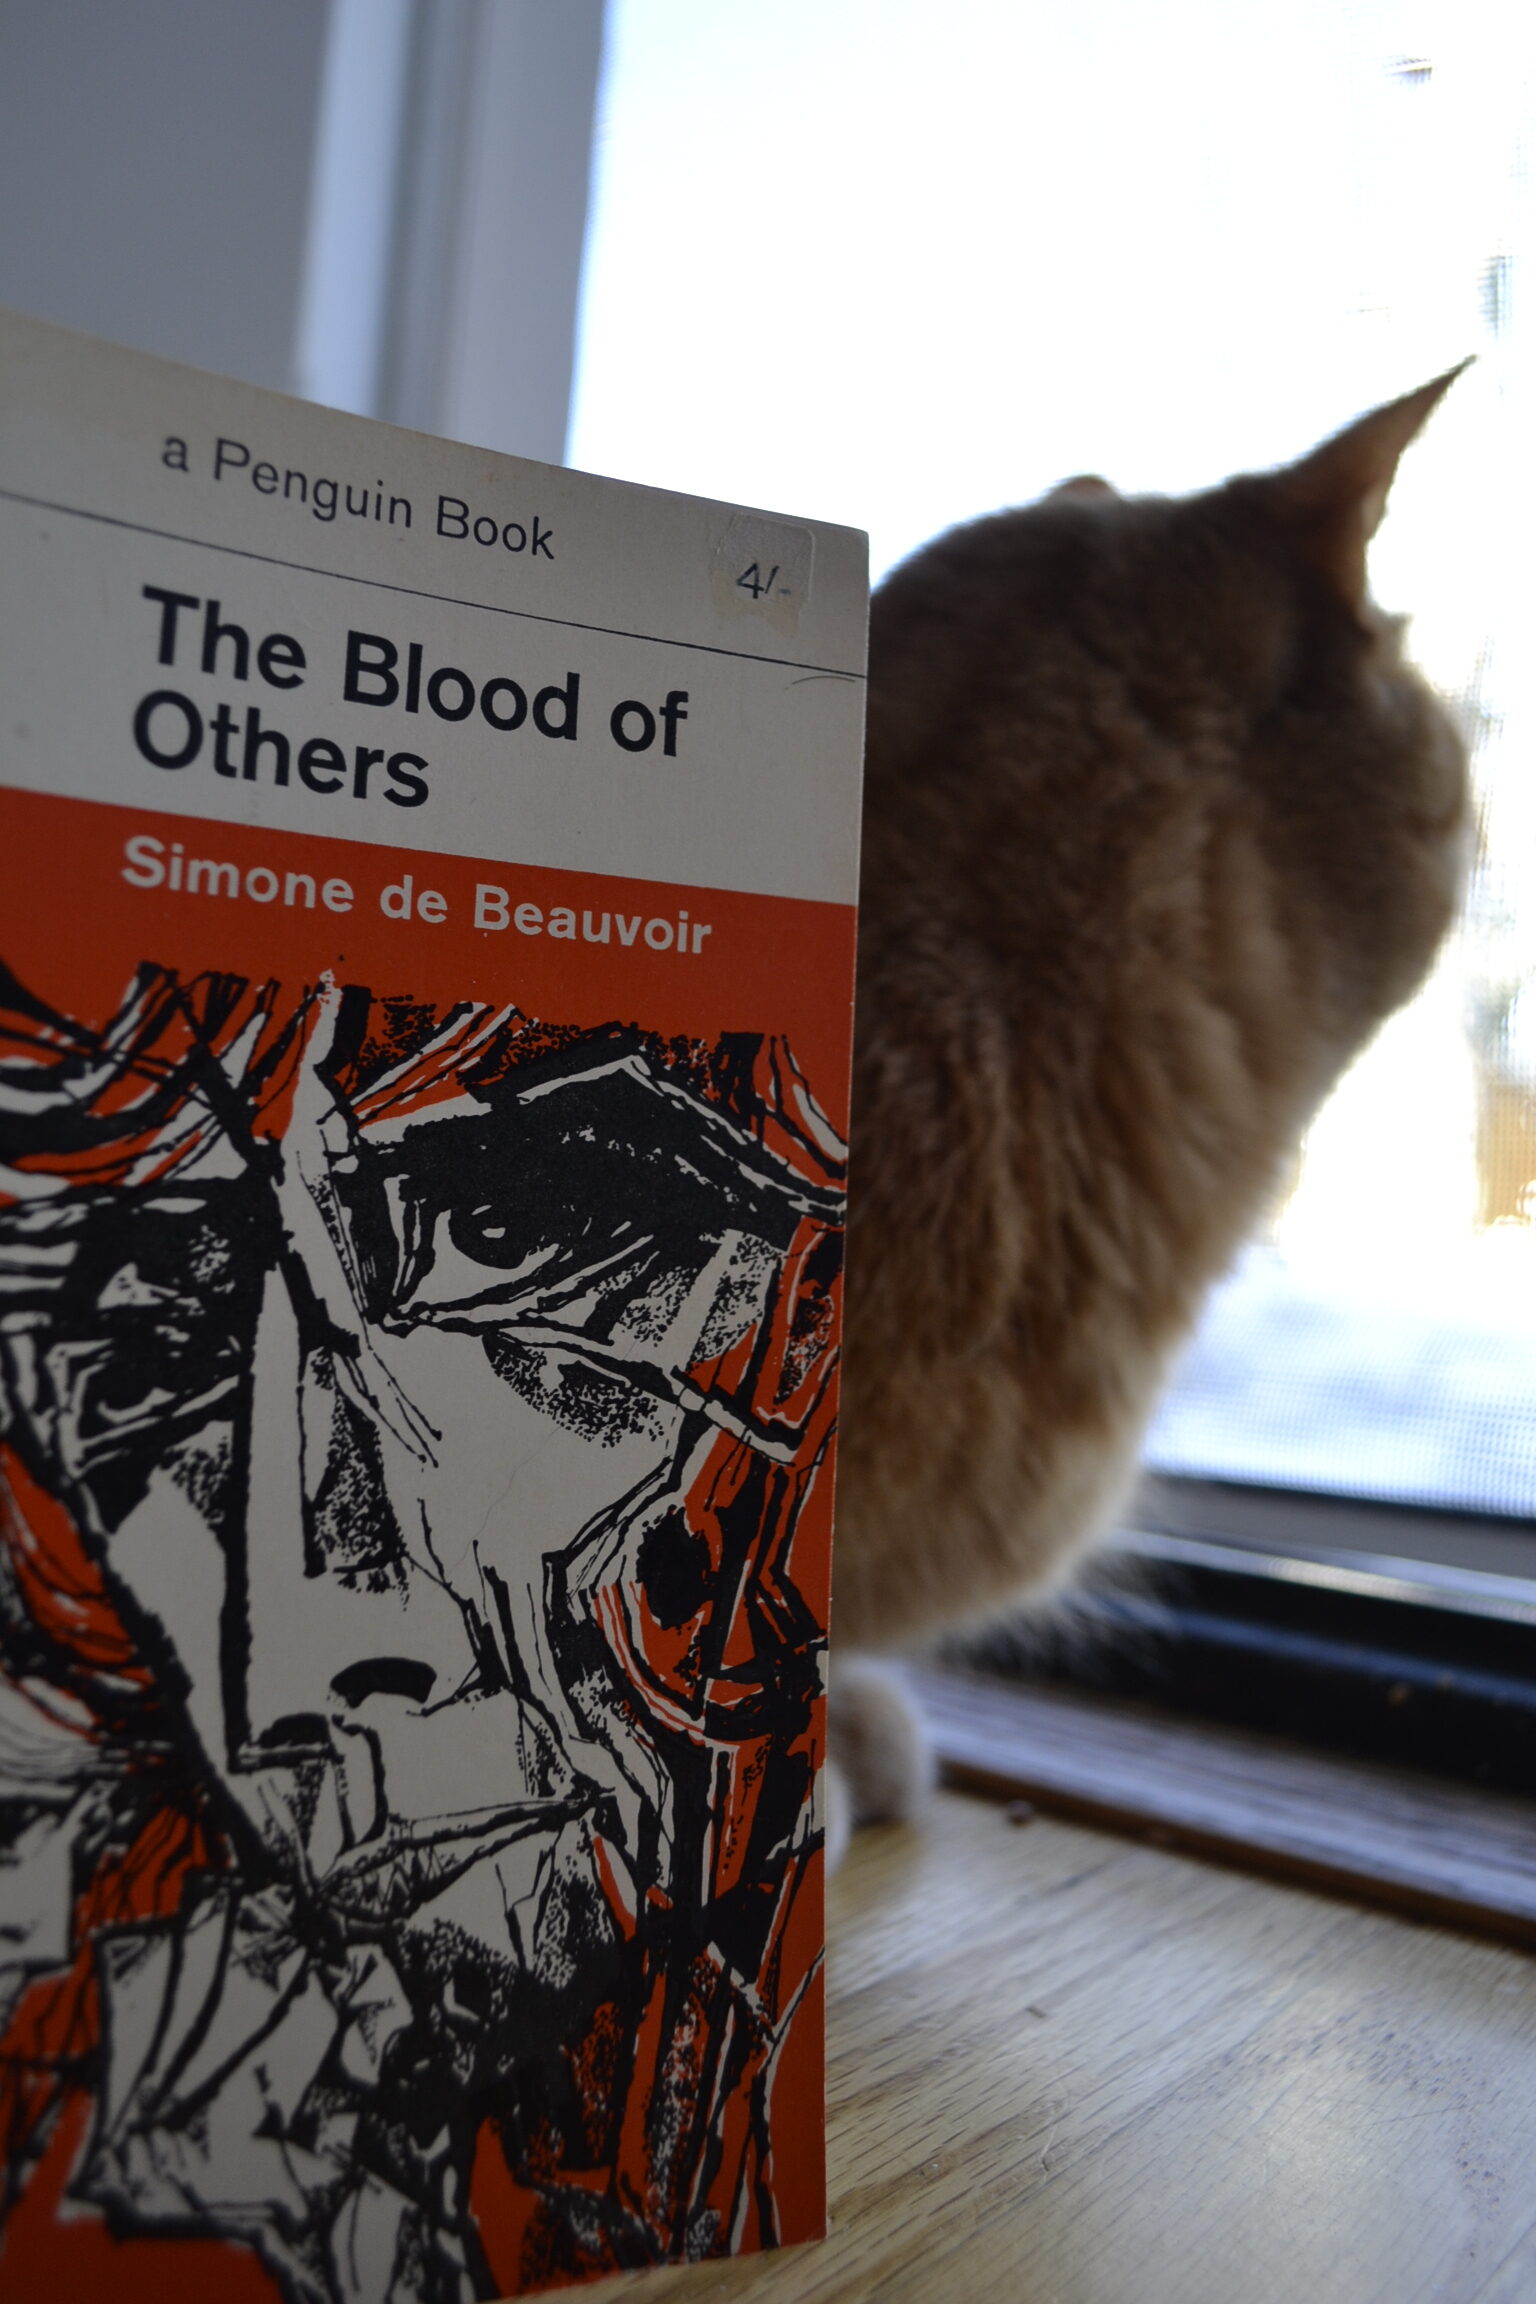 A jagged and scrambled image of a face on an orange book sits beneath the title: The Blood of Others.